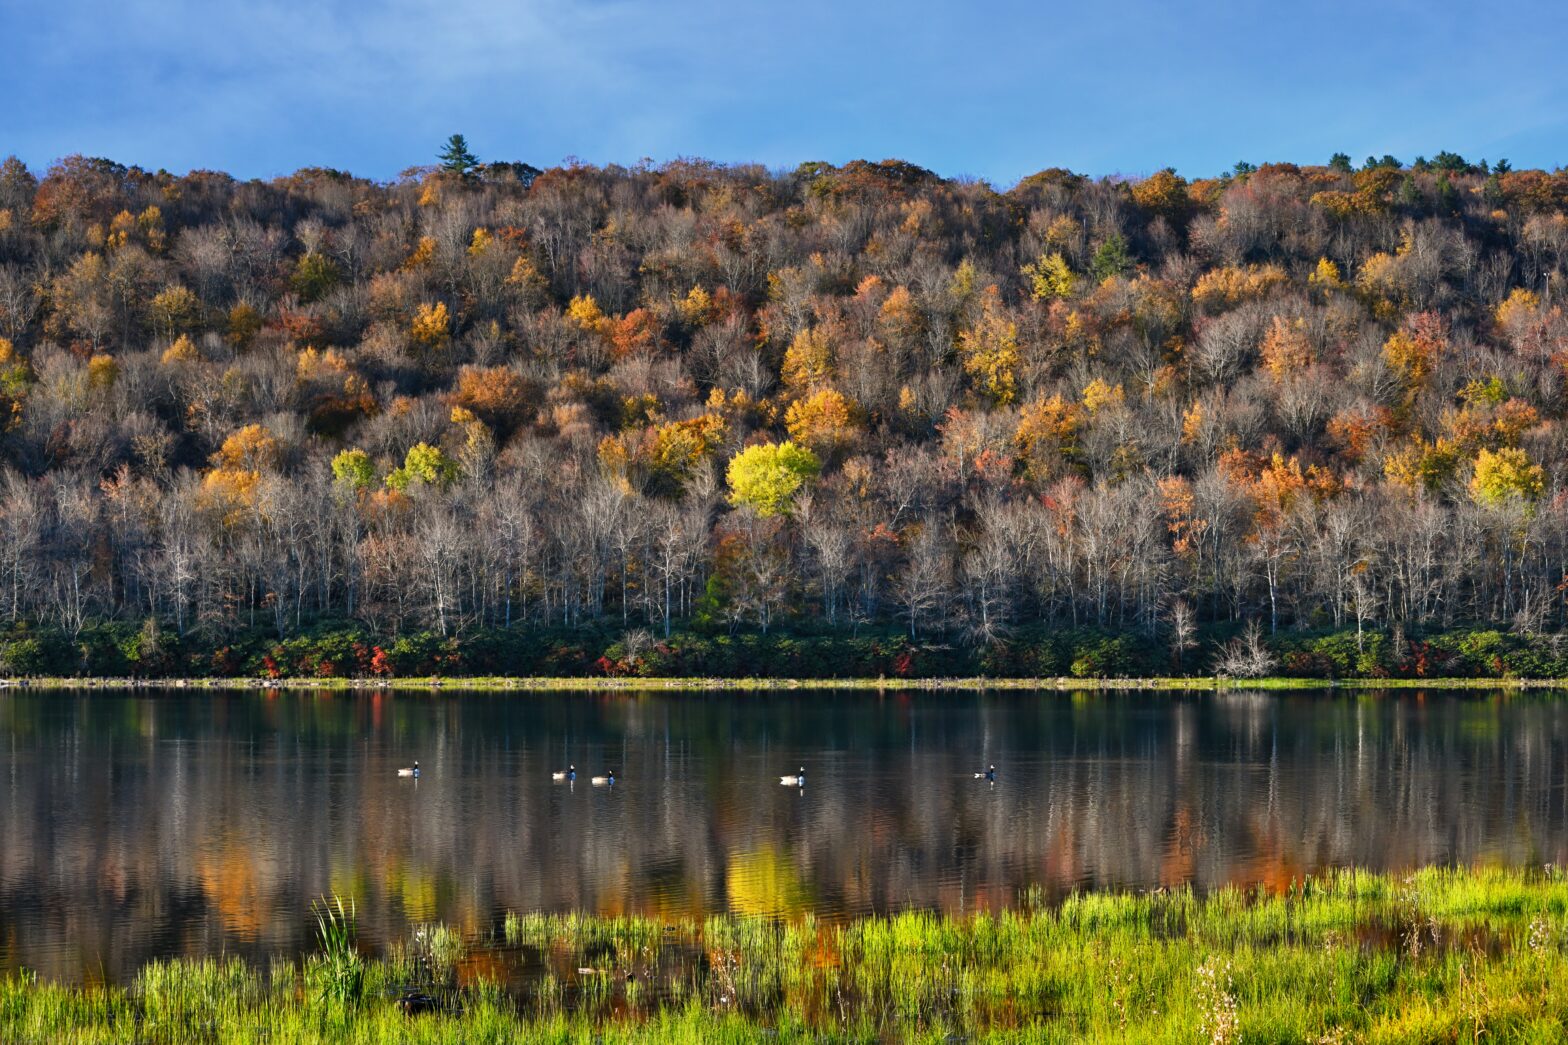 10 Things To Do In The Poconos For $25 Dollars Or Less